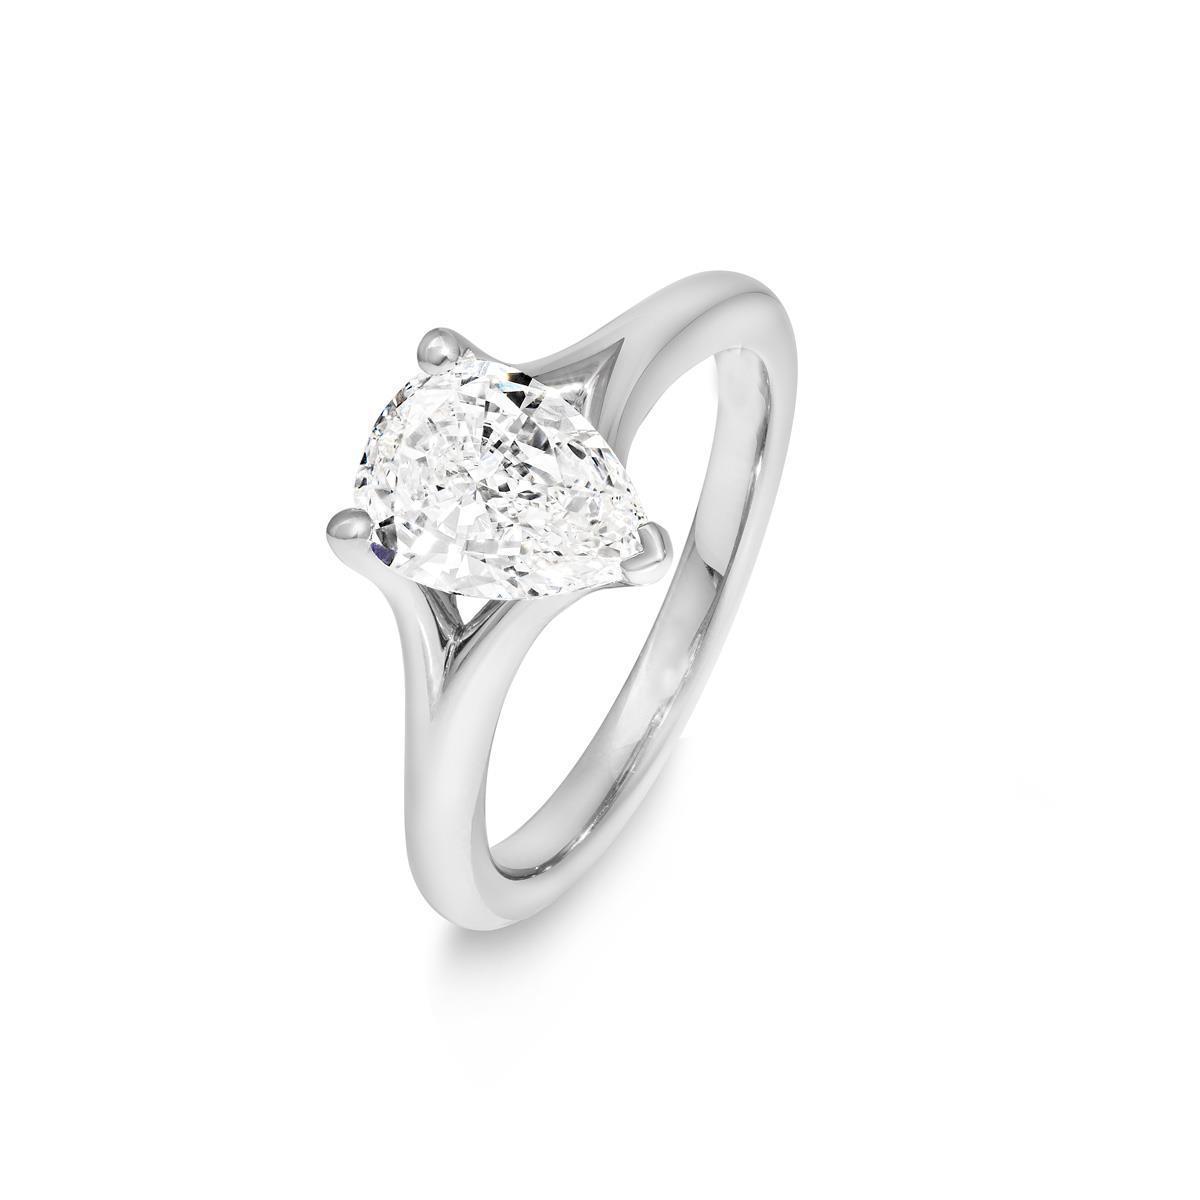 Picture of Harry Chad Enterprises 28767 2 CT 14K White Gold Solitaire Sparkling Pear Cut Diamond Wedding Ring